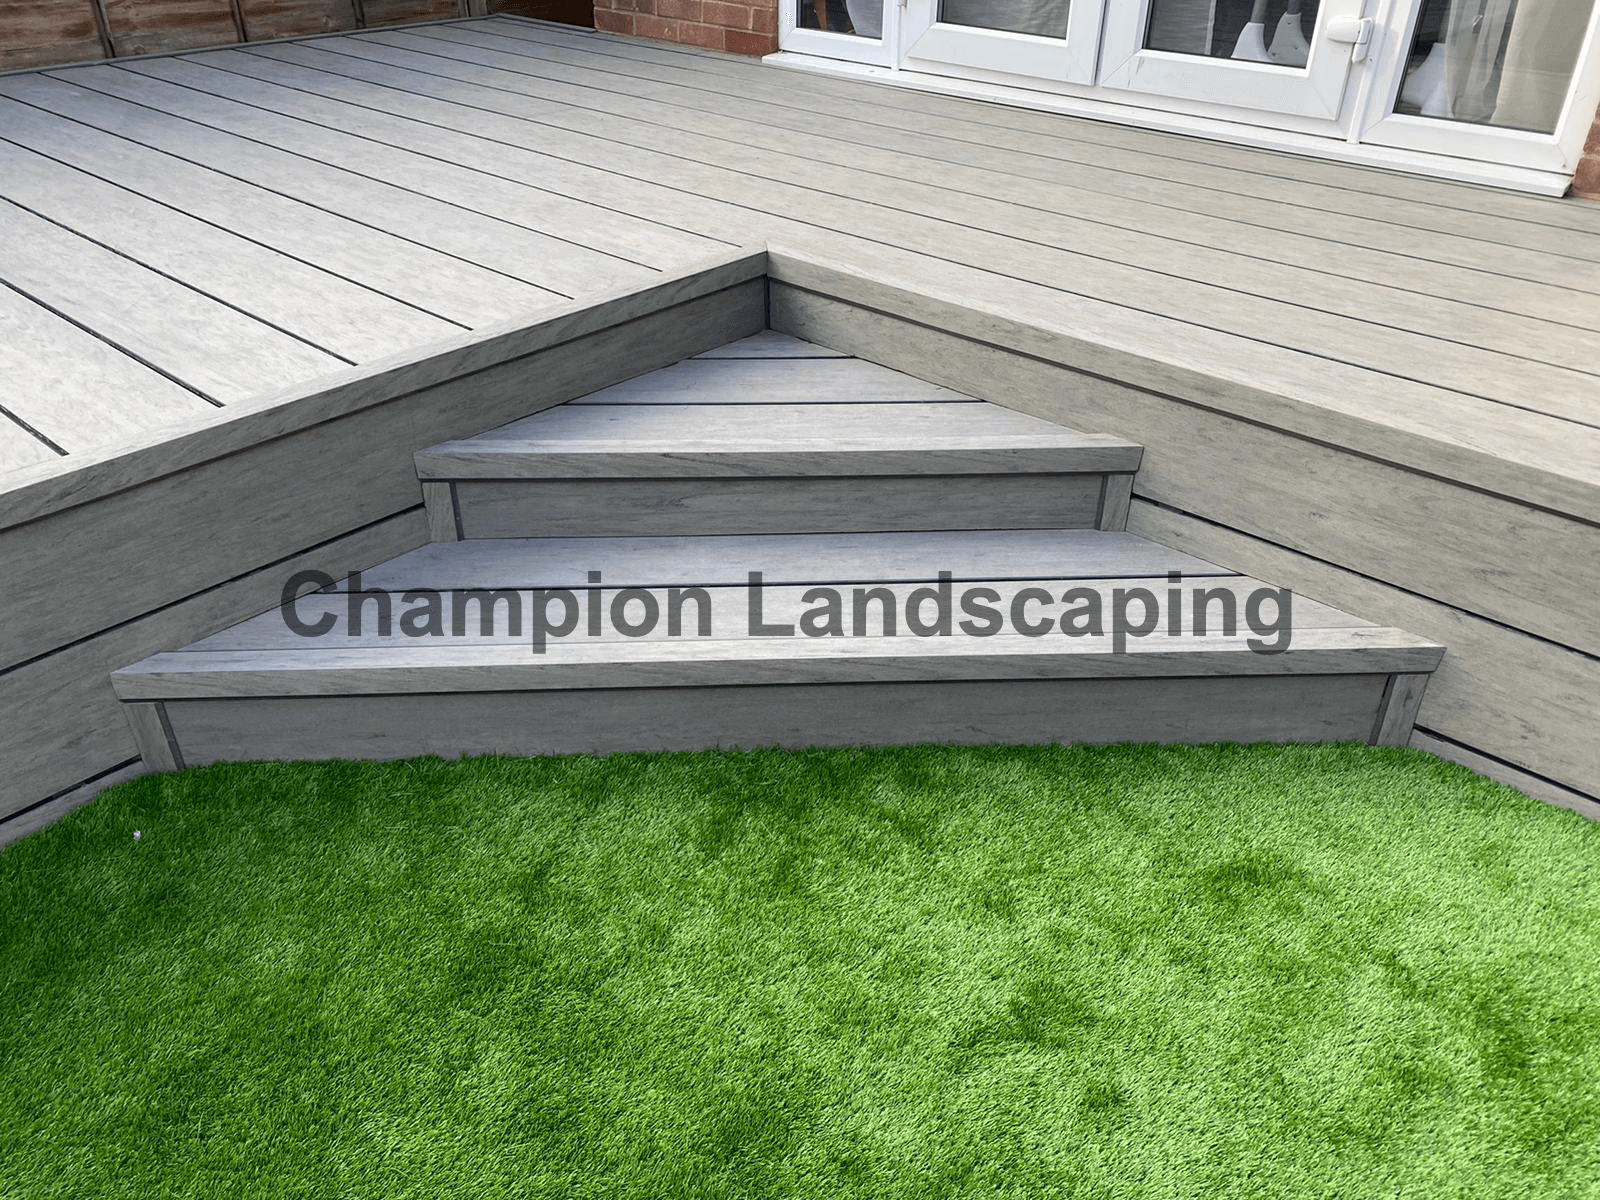 https://www.championlandscaping.co.uk/wp-content/uploads/2021/10/125.png